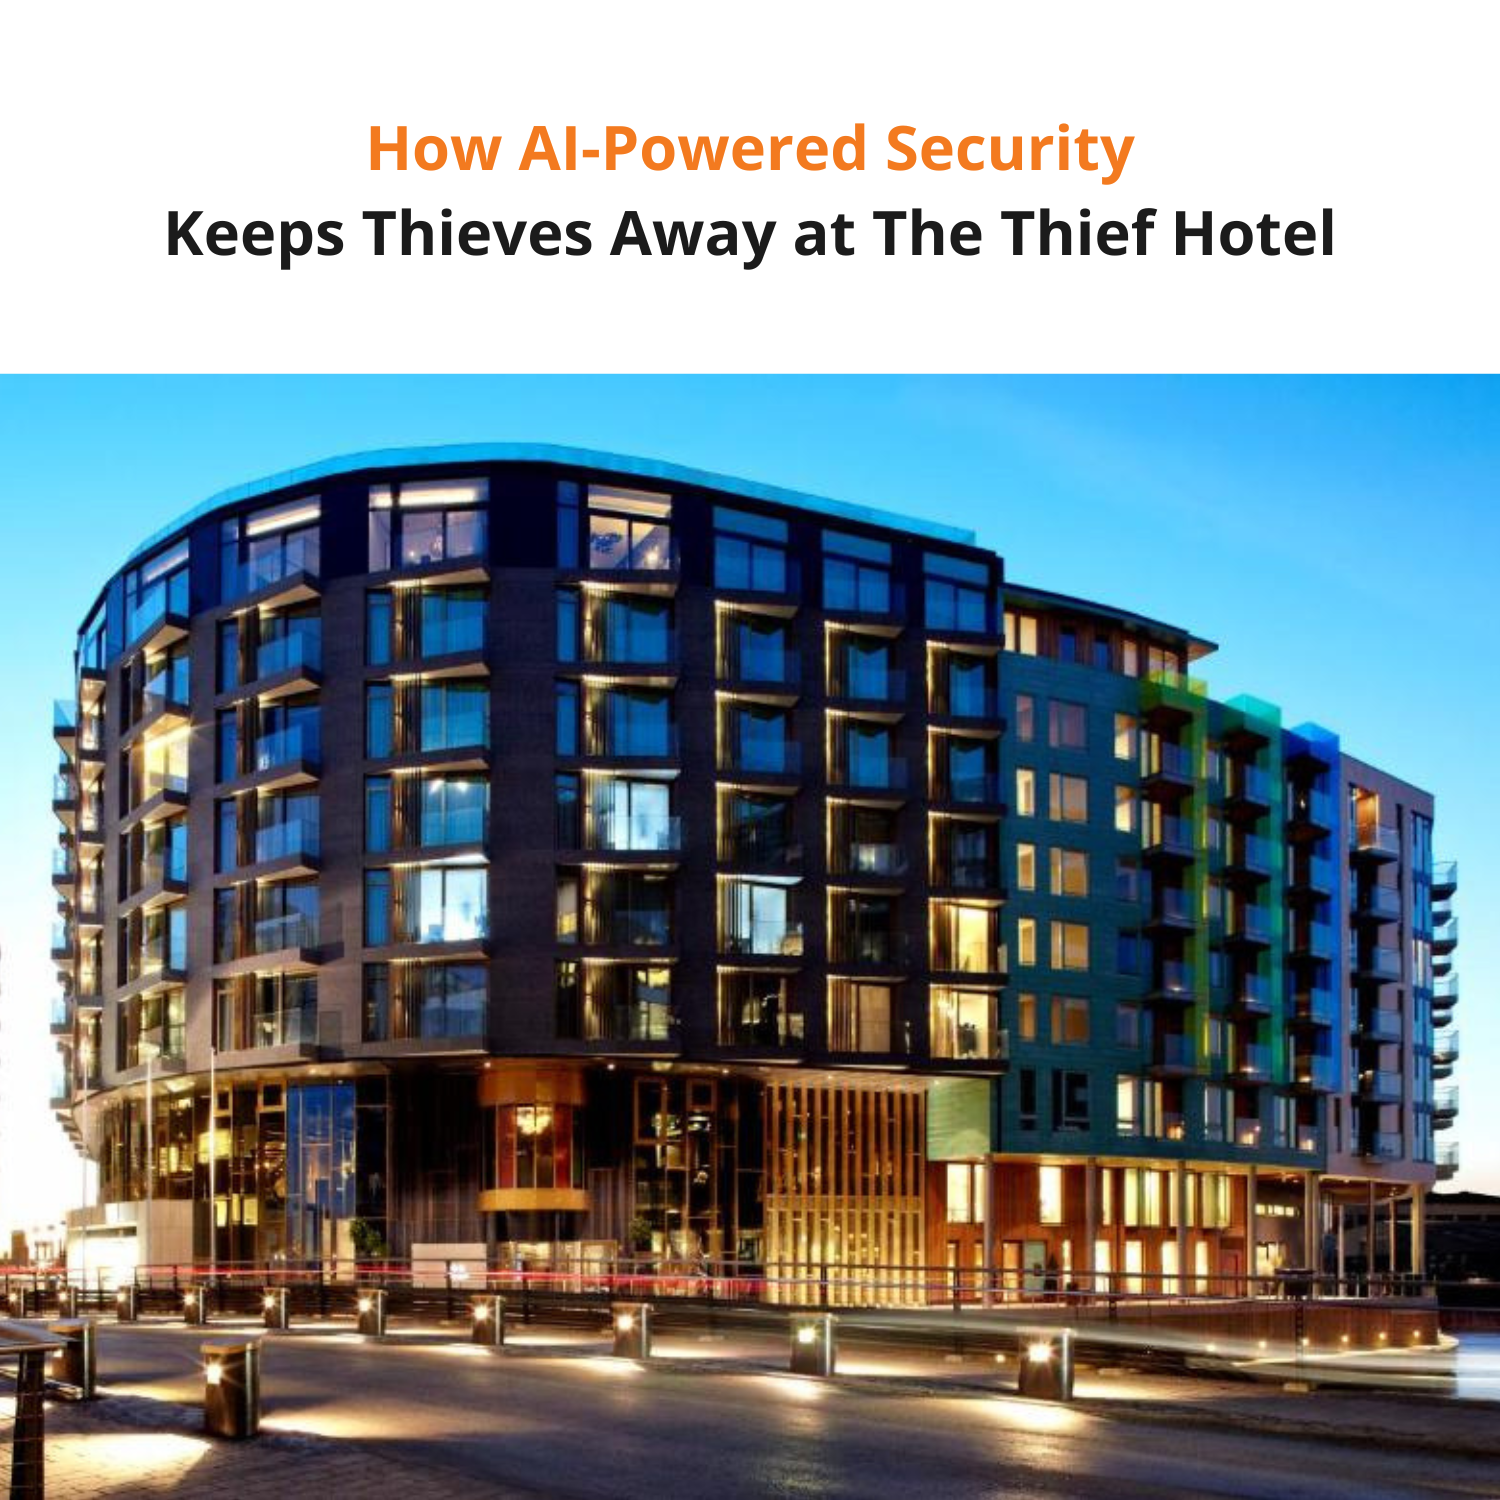 How AI-Powered Security Keeps Thieves Away at The Thief Hotel